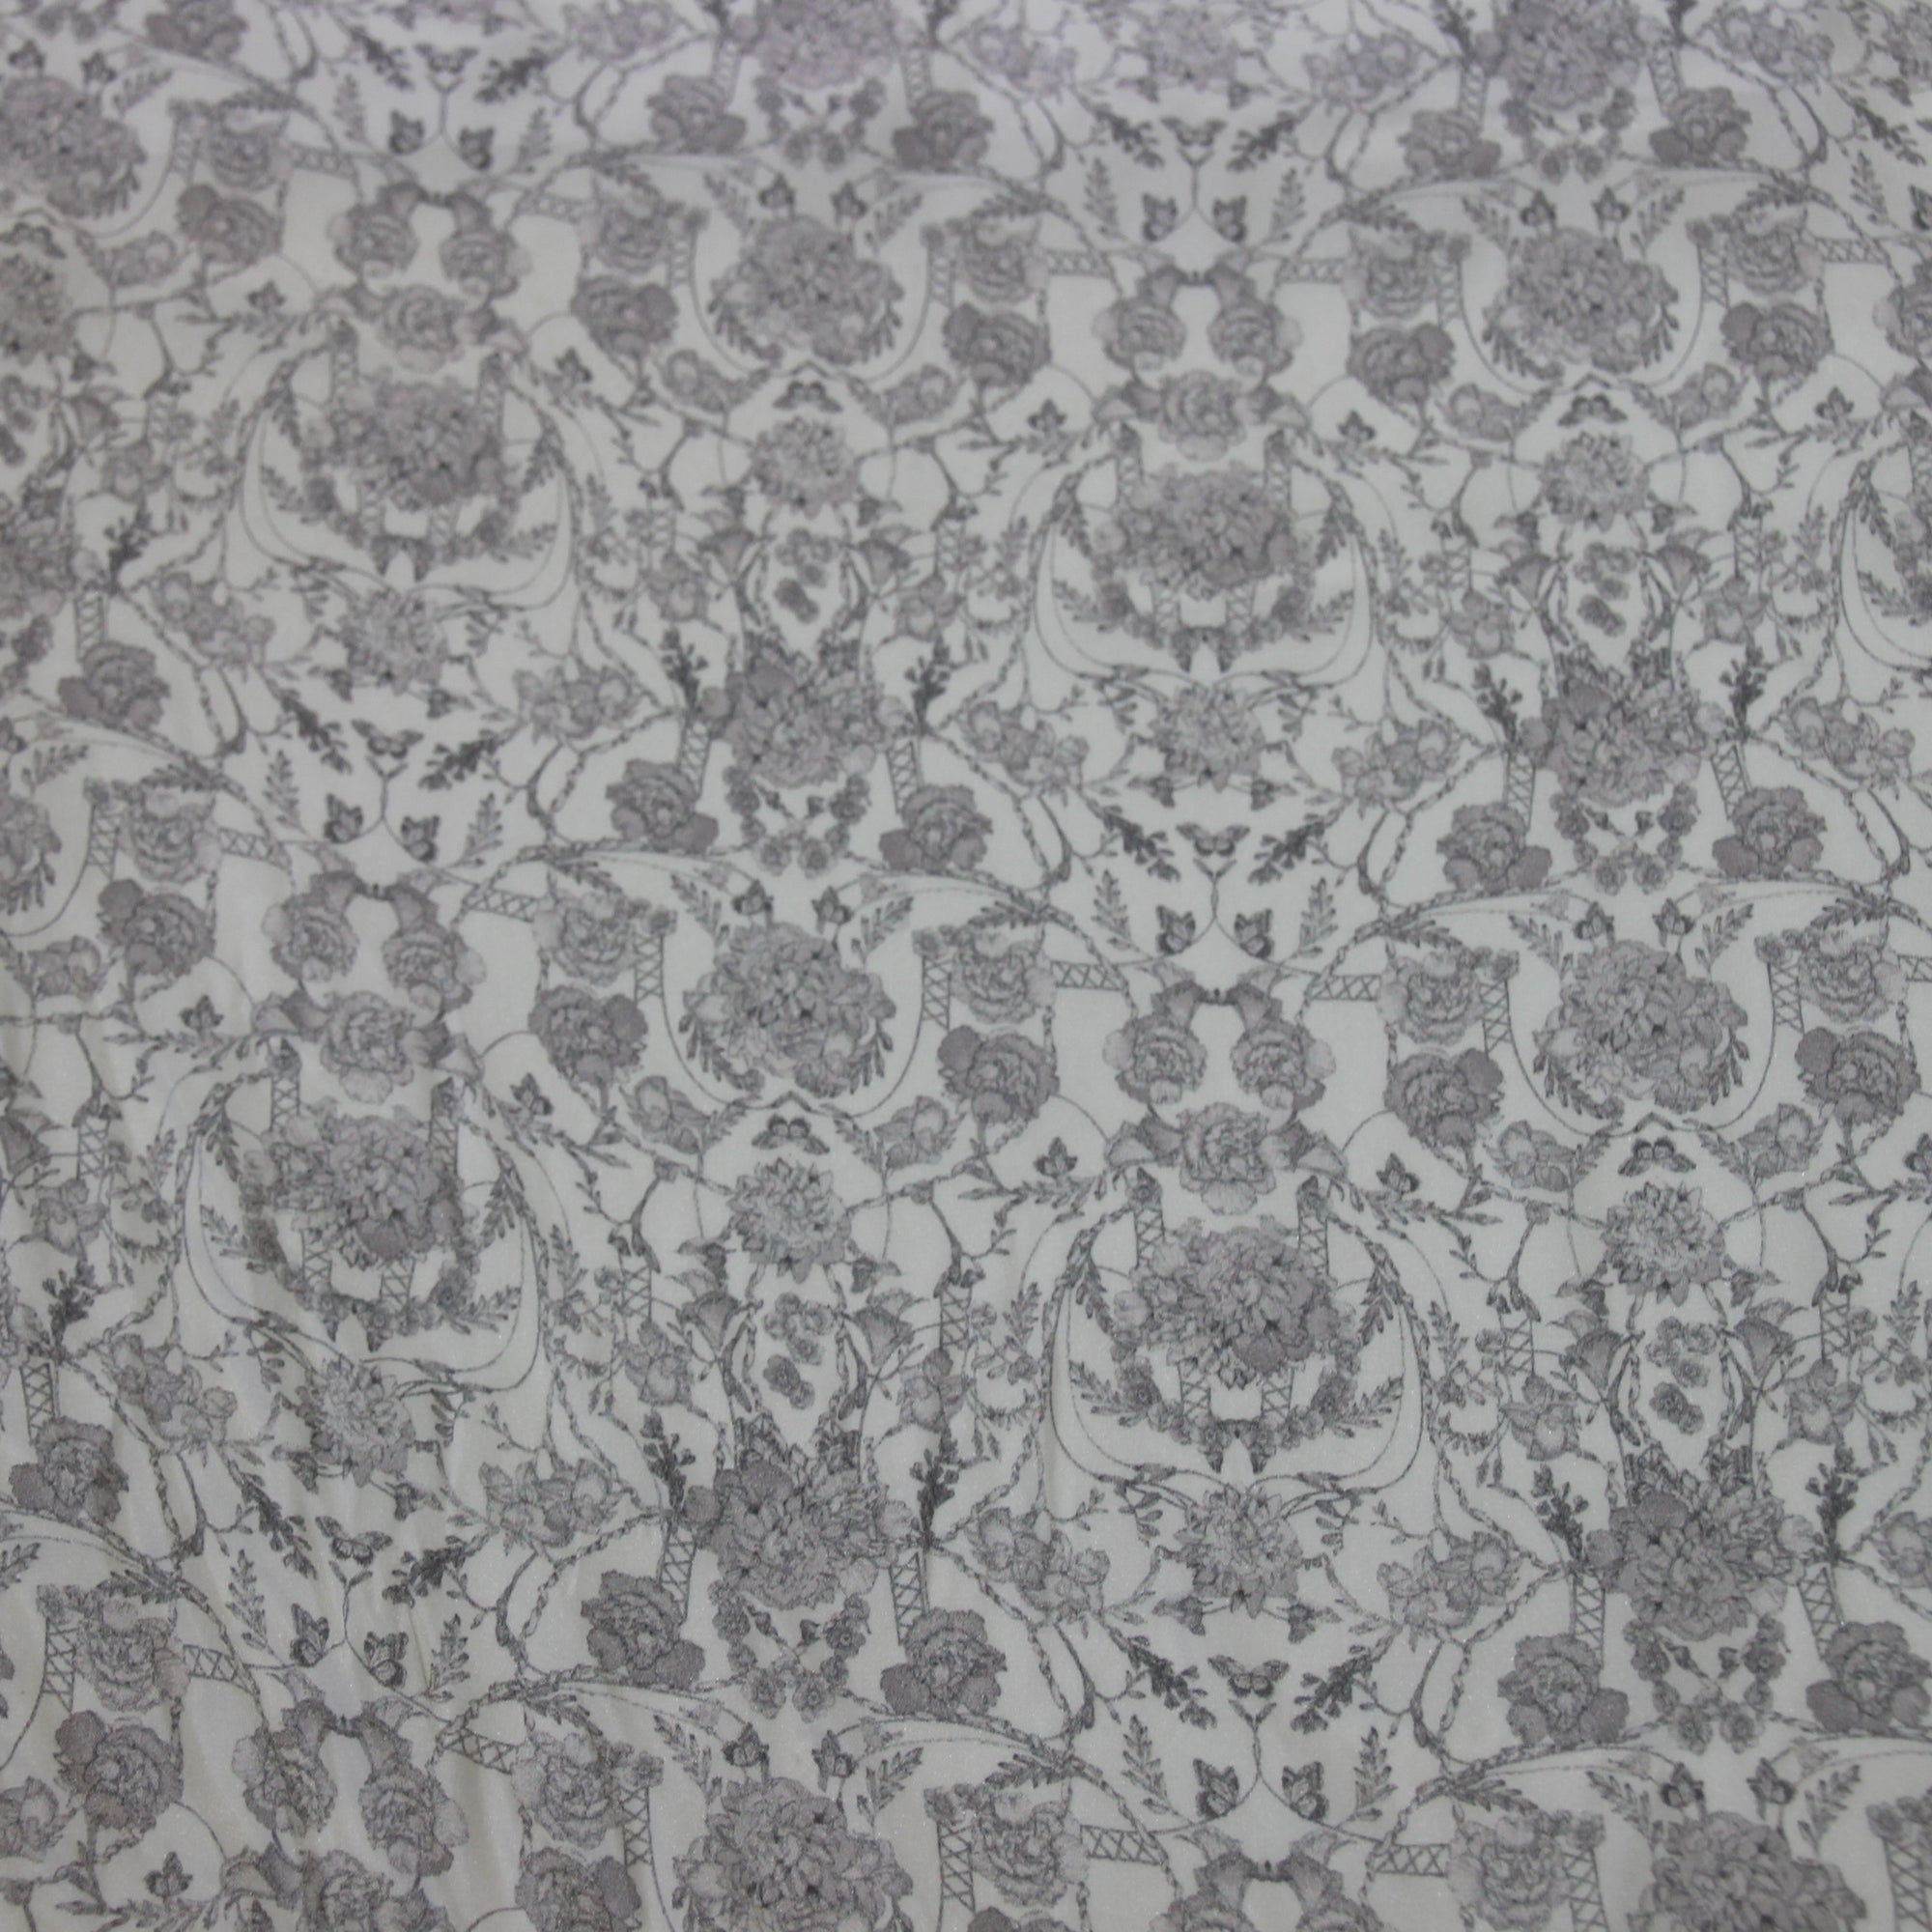 Displaying Filigree a gray toned floral print on pure silk